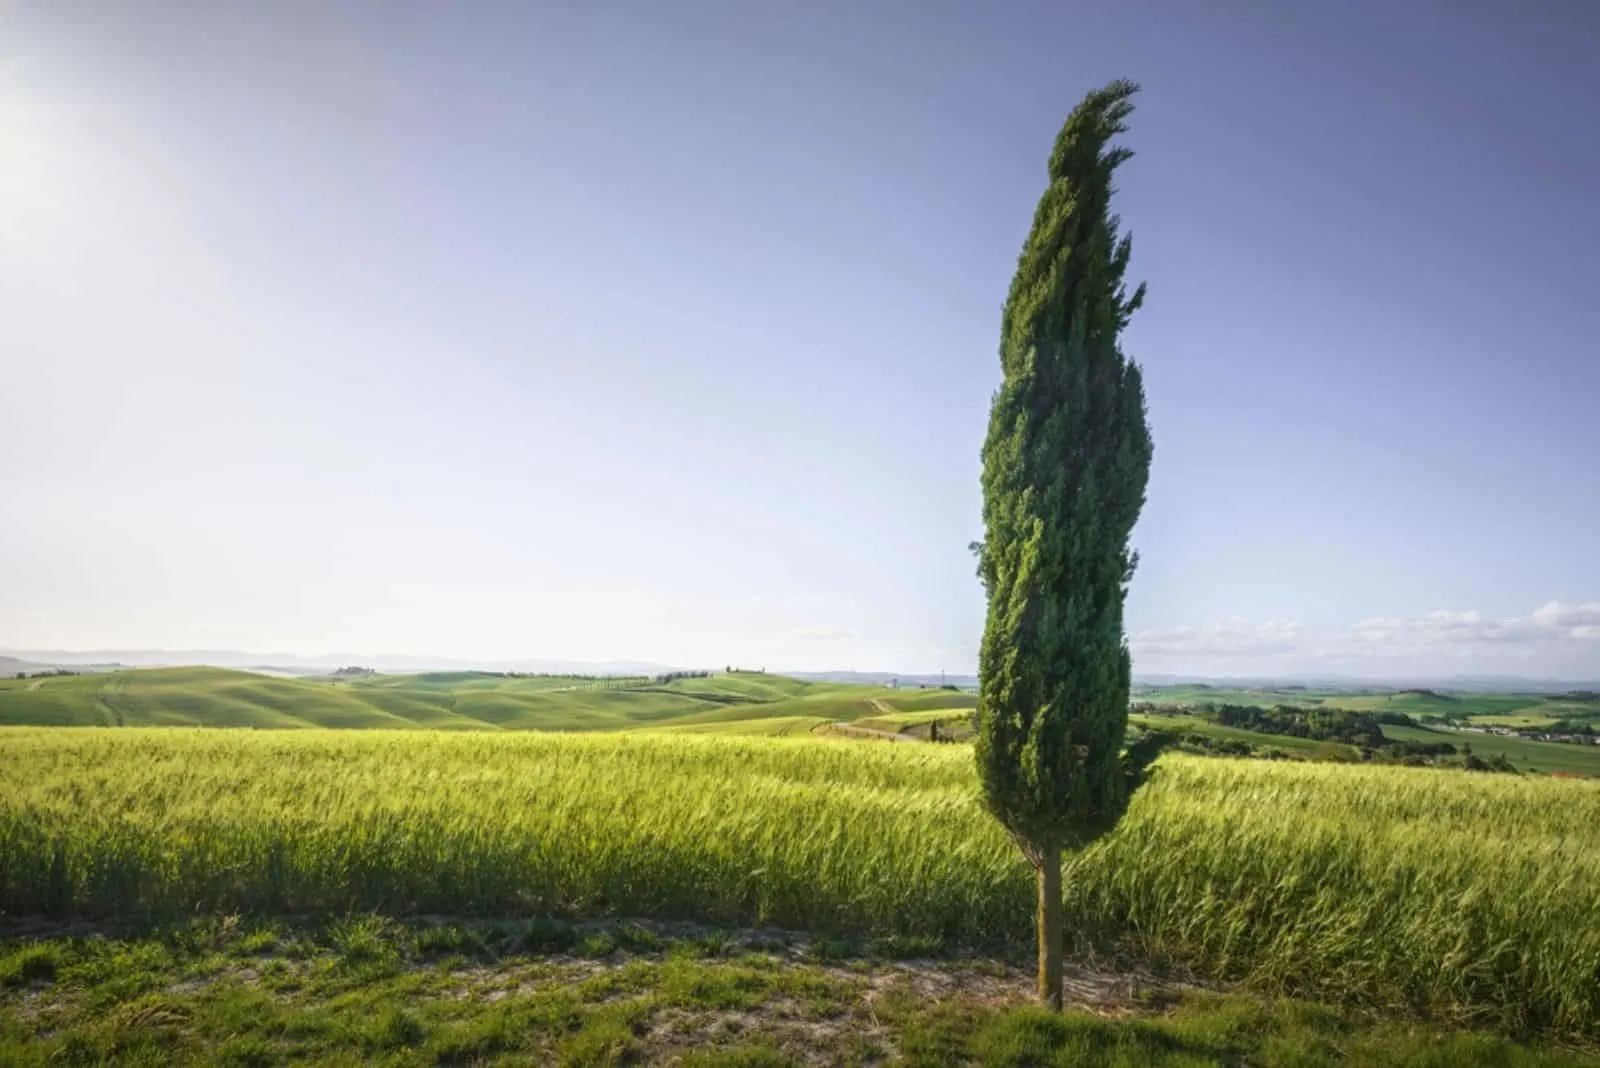 cypress tree and wheat field along the route 